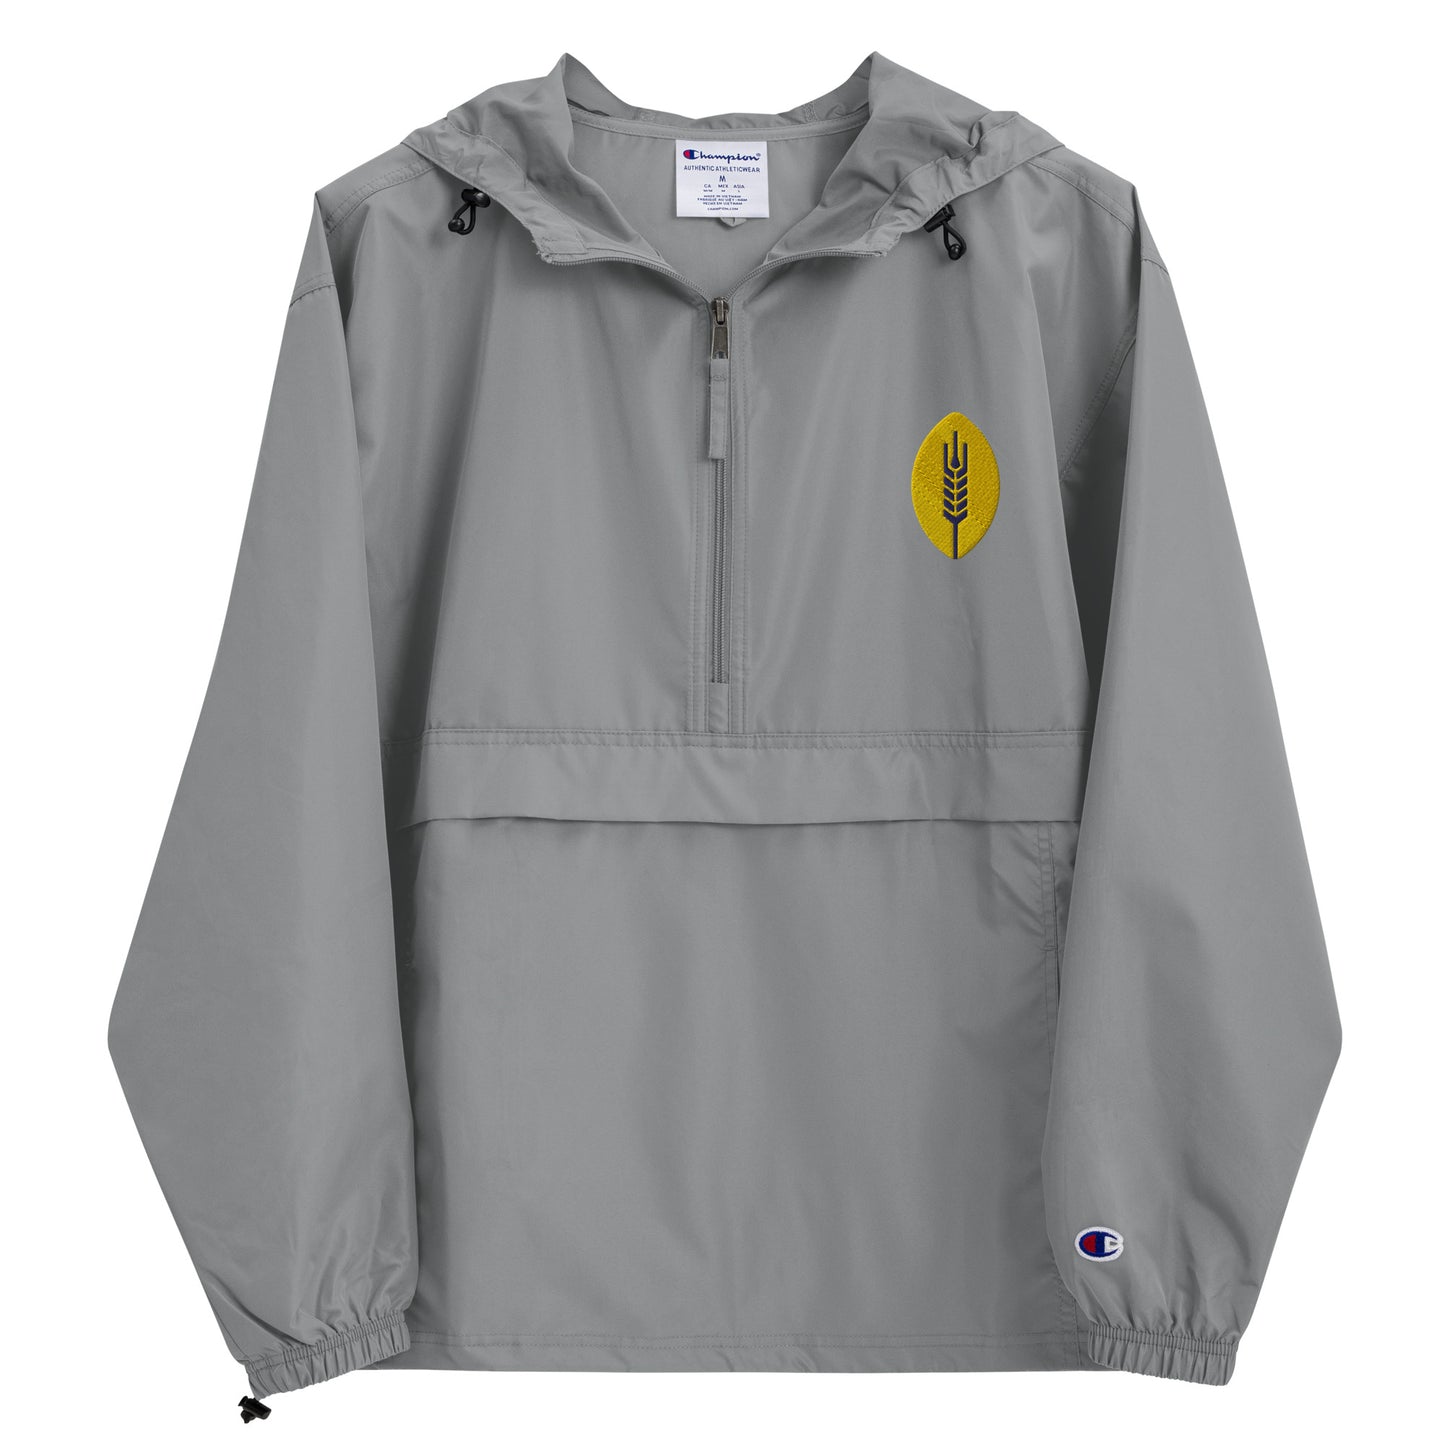 Titletown Brewing Co. Embroidered Champion Packable Jacket